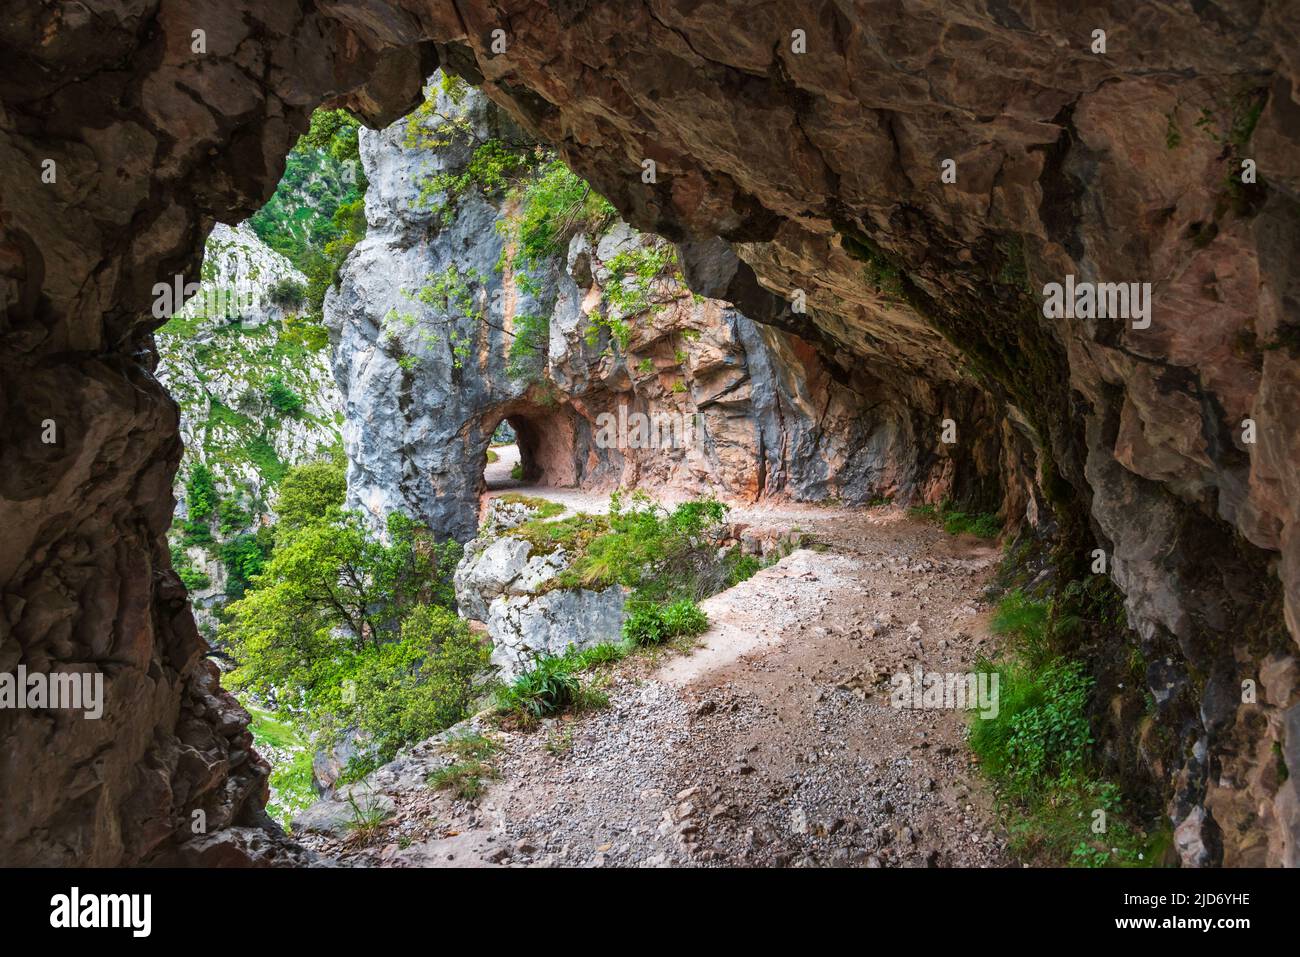 Tunnels excavated in the rock on the Cares river path. Stock Photo